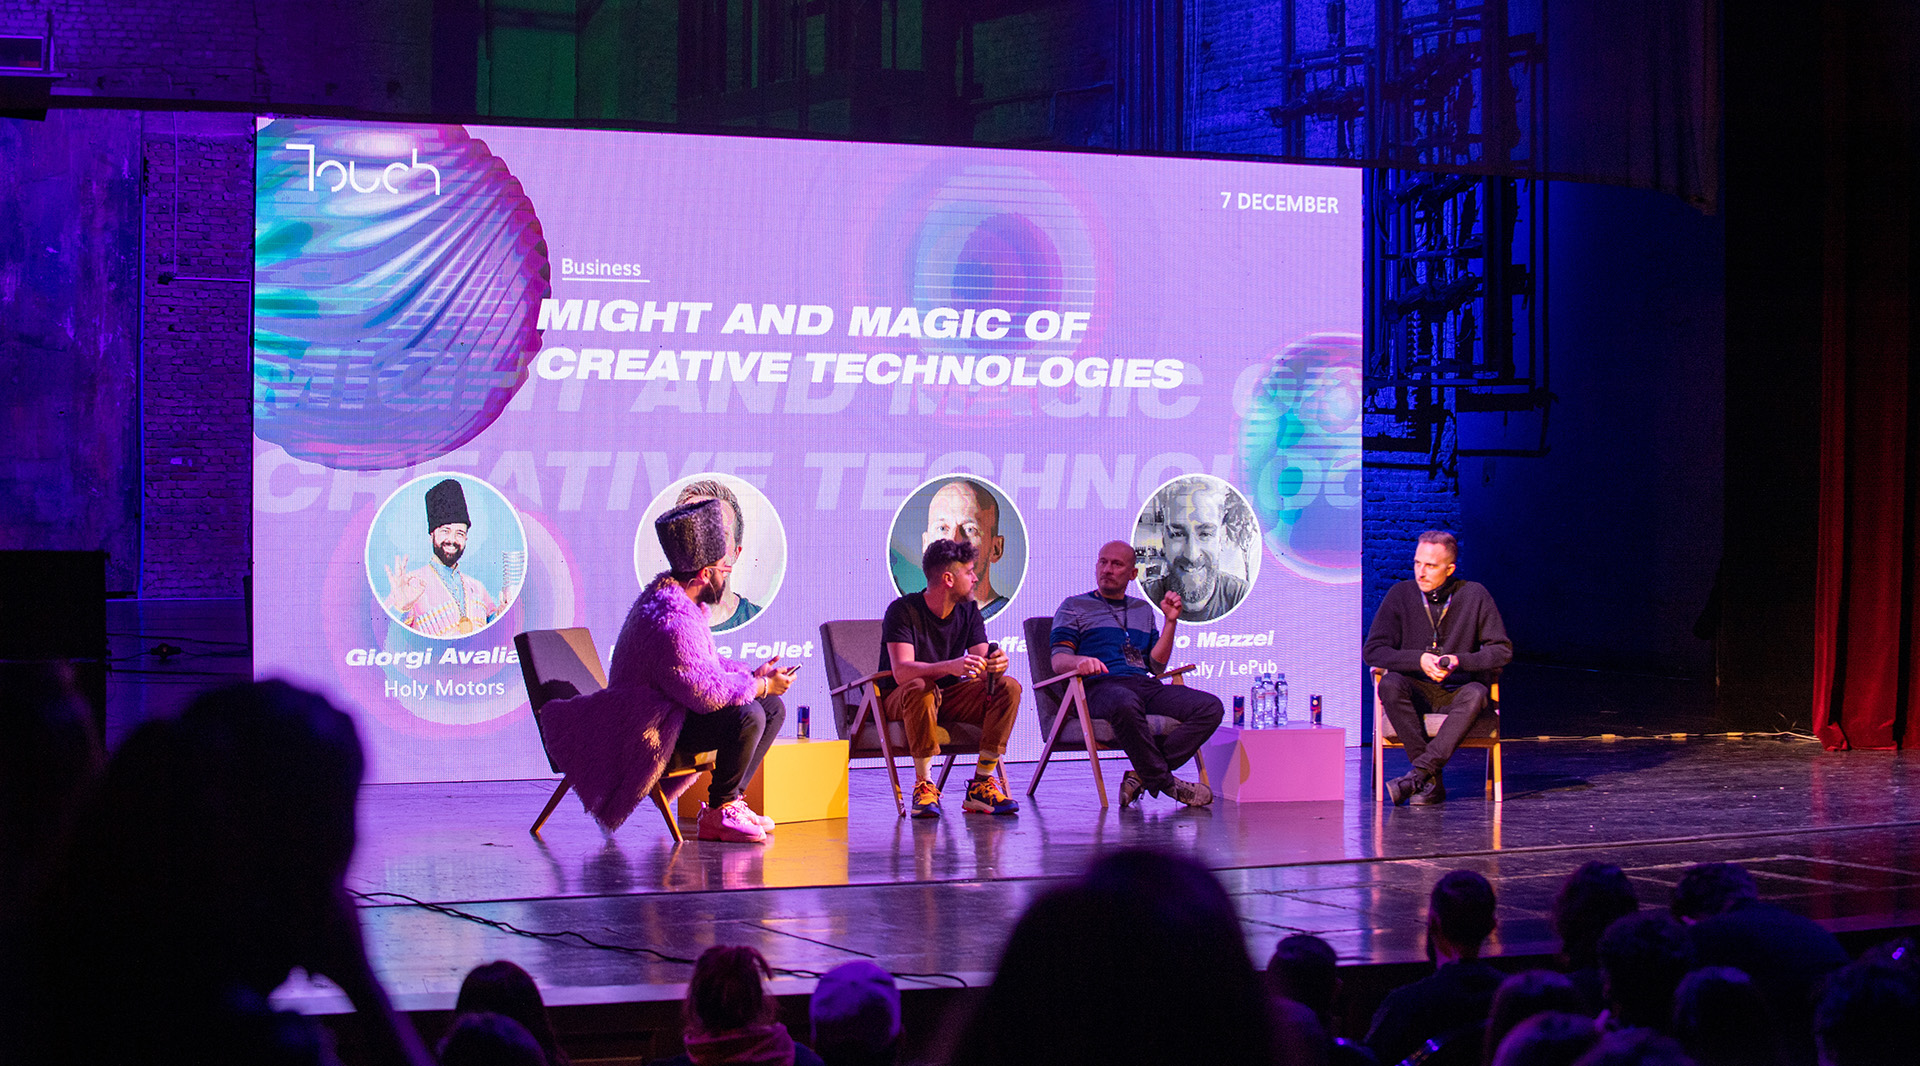 Lysandre FOLLET on stage at TOUCH 2022 for a panel discussion on the magic of creative technologies